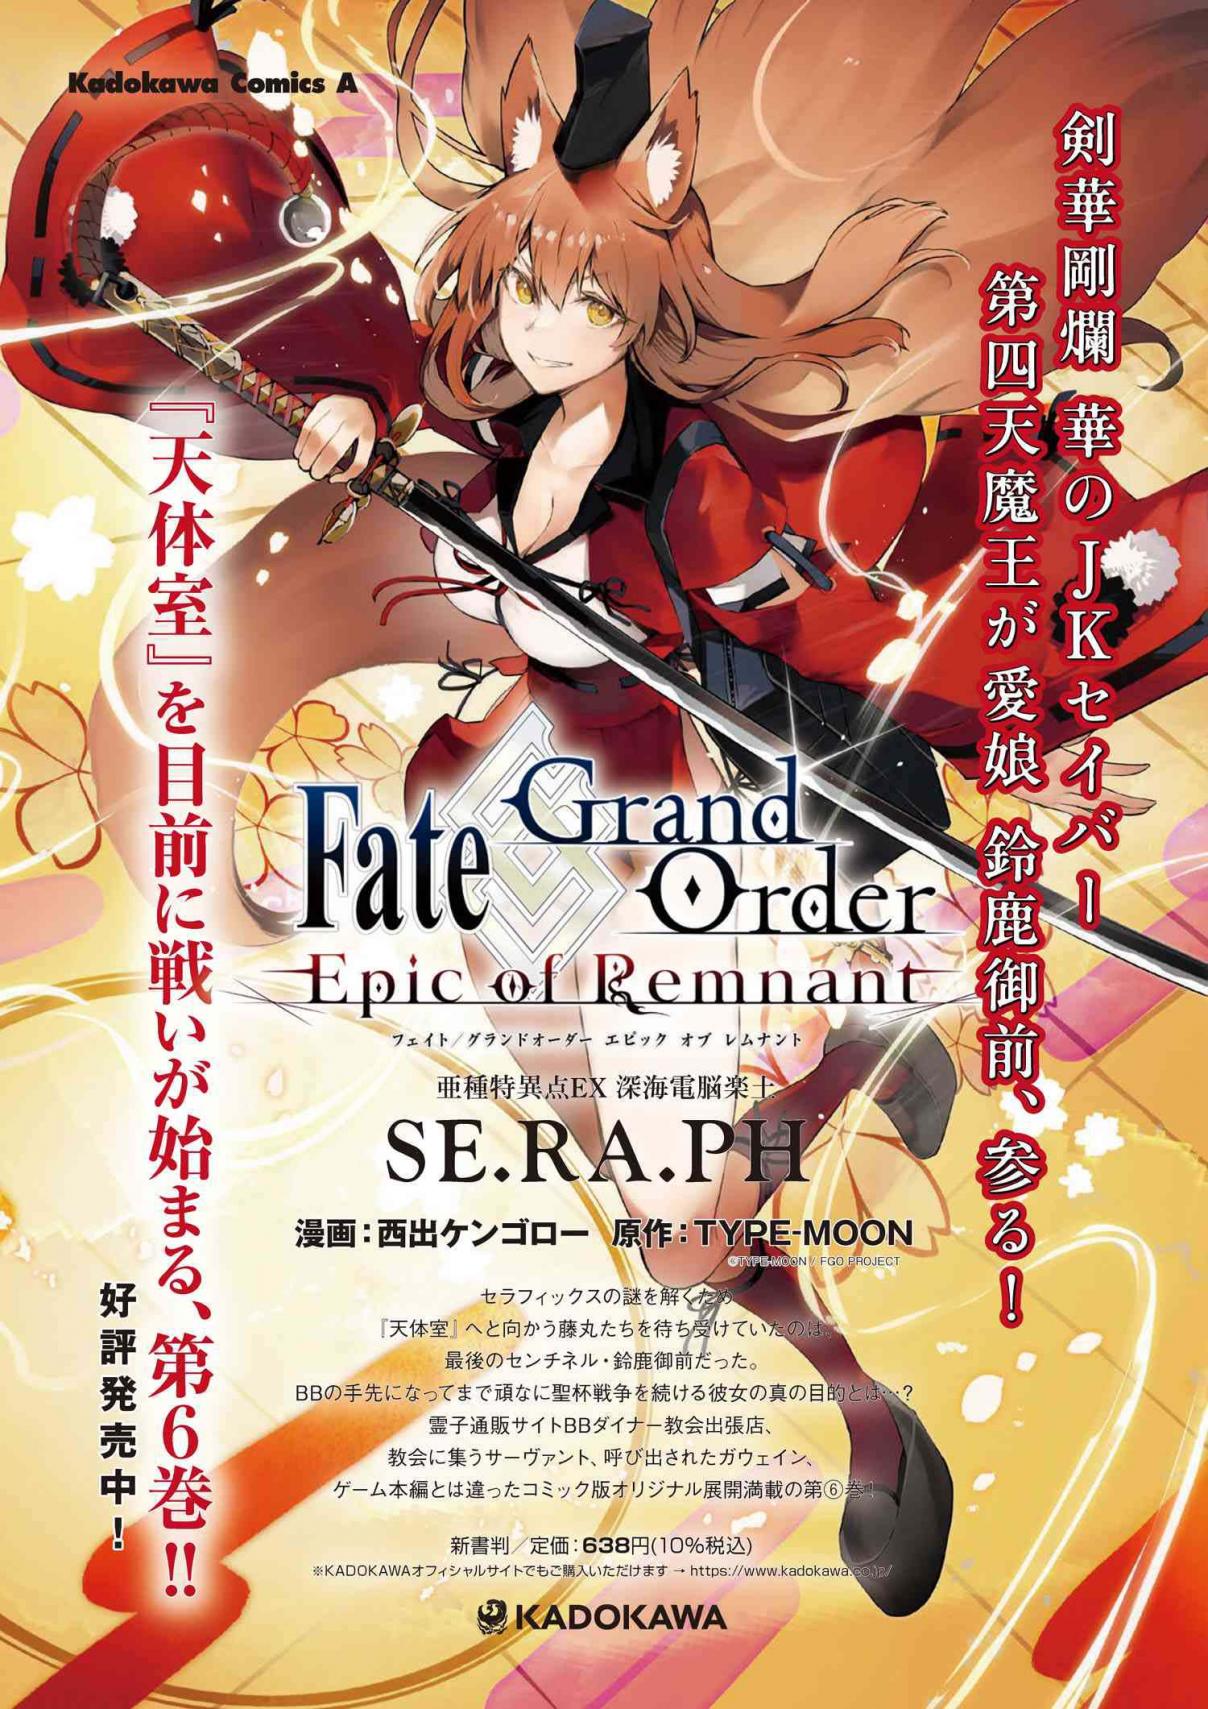 Fate/Grand Order -Epic of Remnant- Deep Sea Cyber-Paradise, SE.RA.PH 31.2